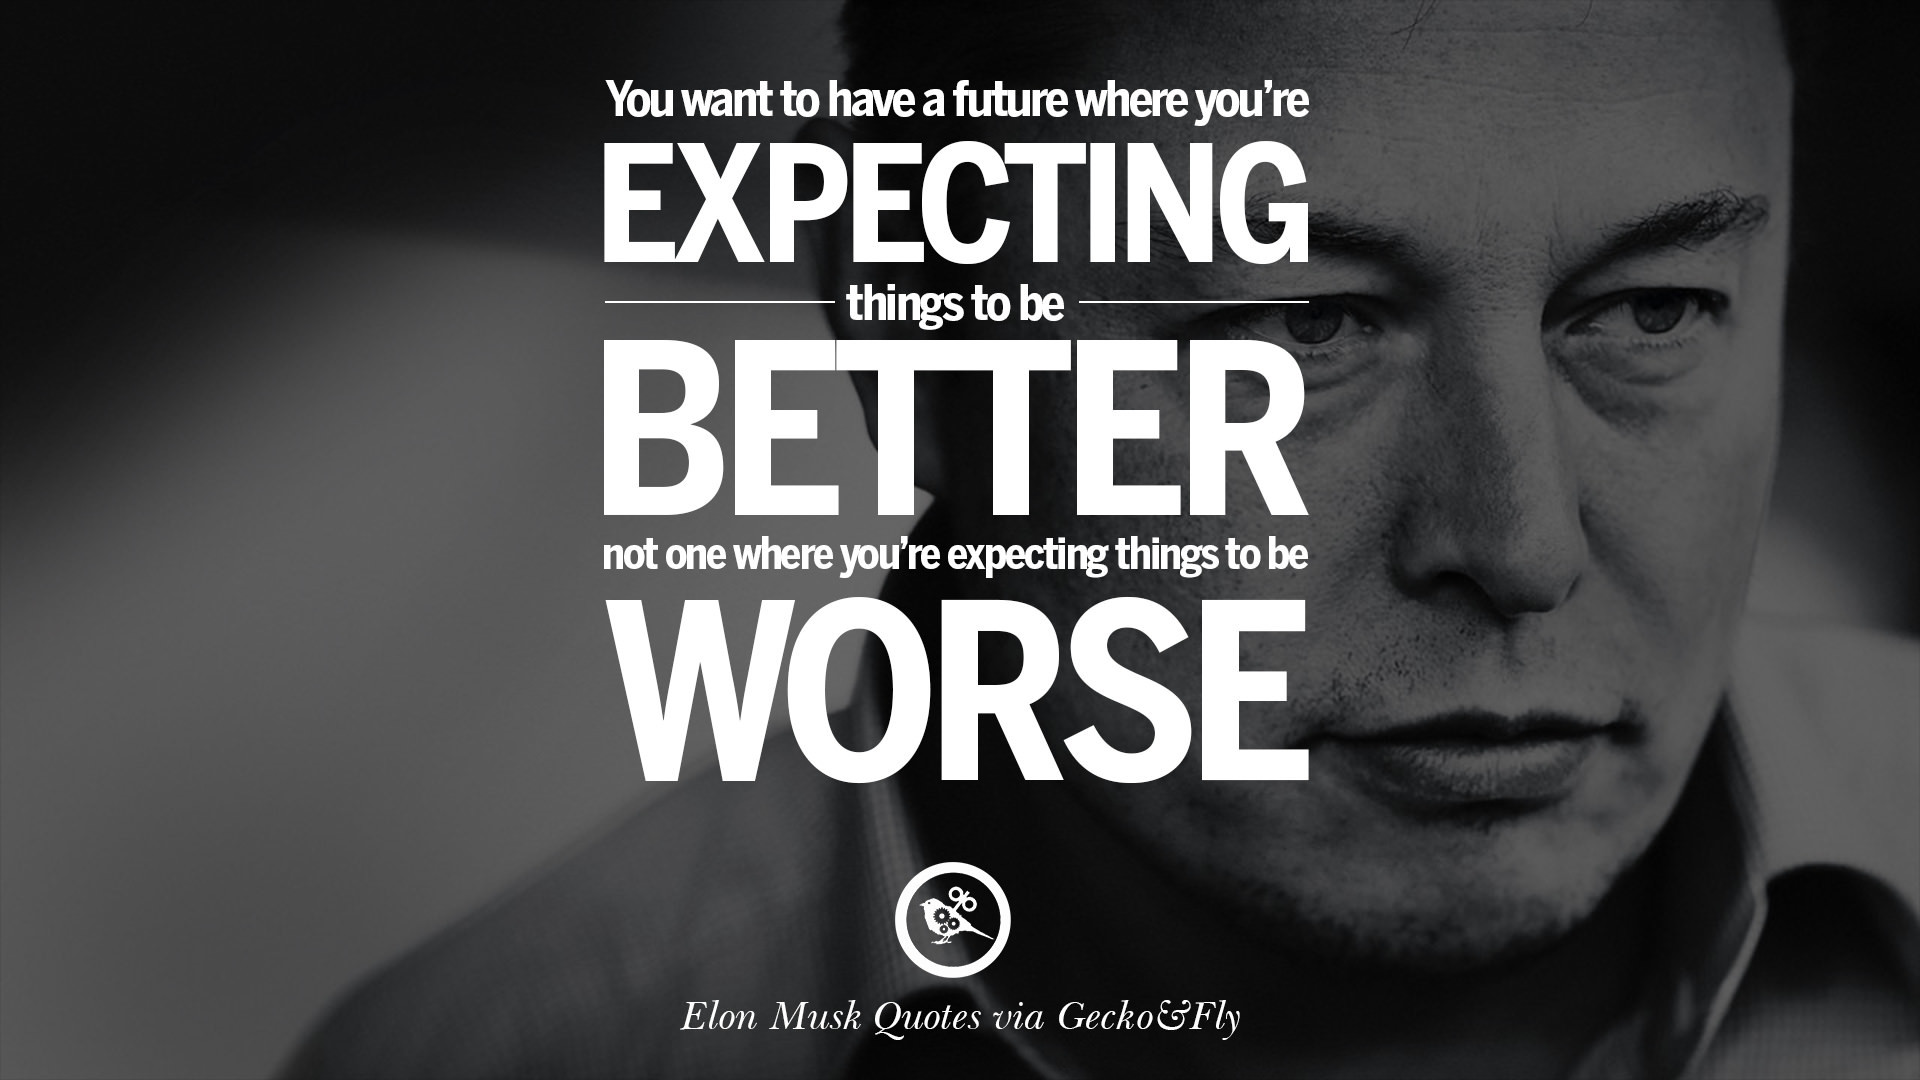 1920x1080 You want to have a future where you're expecting things to be better, not  one where you're expecting things to be worse.